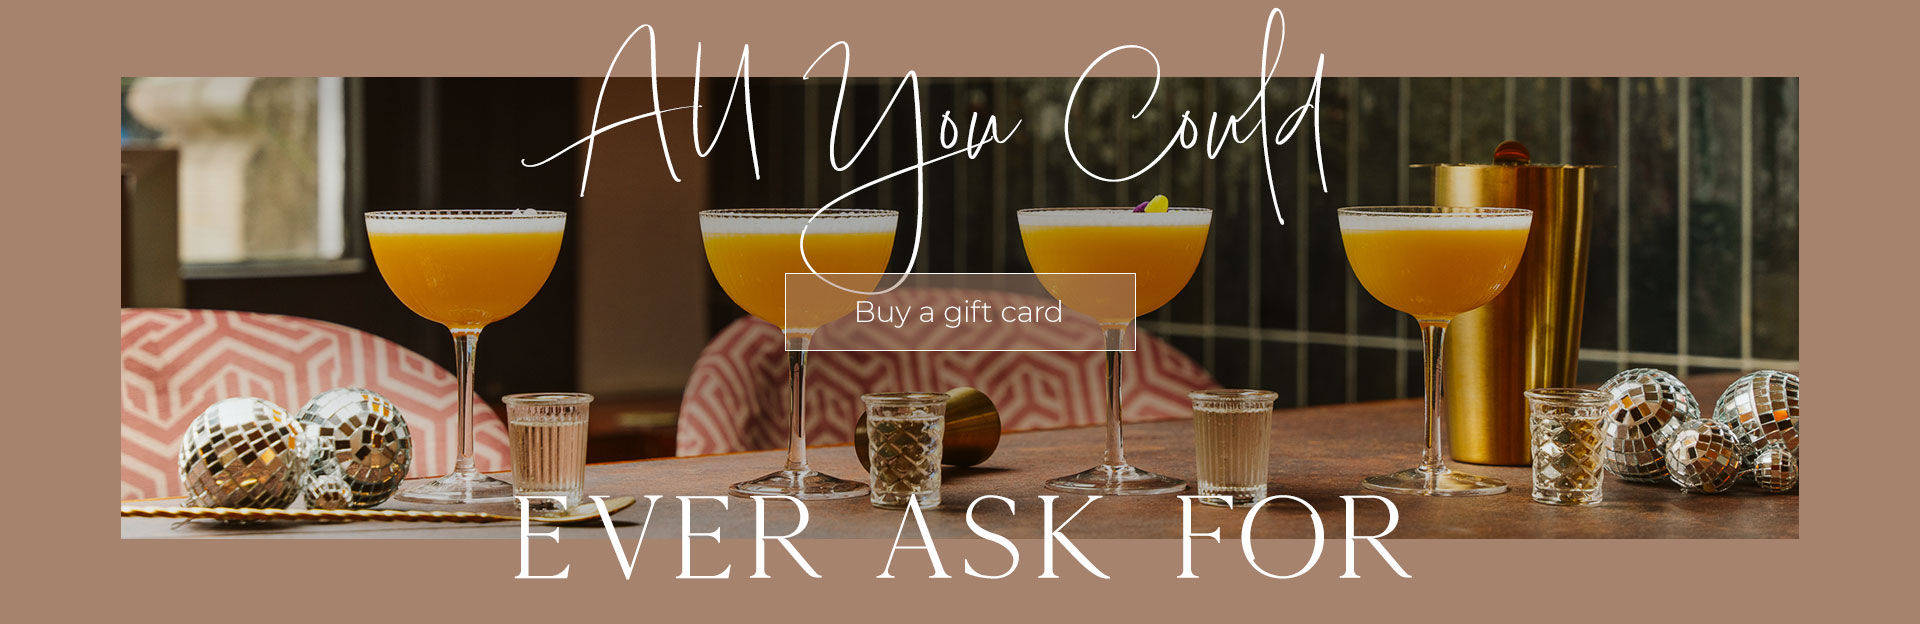 All Bar One Gift Cards at All Bar One Bath